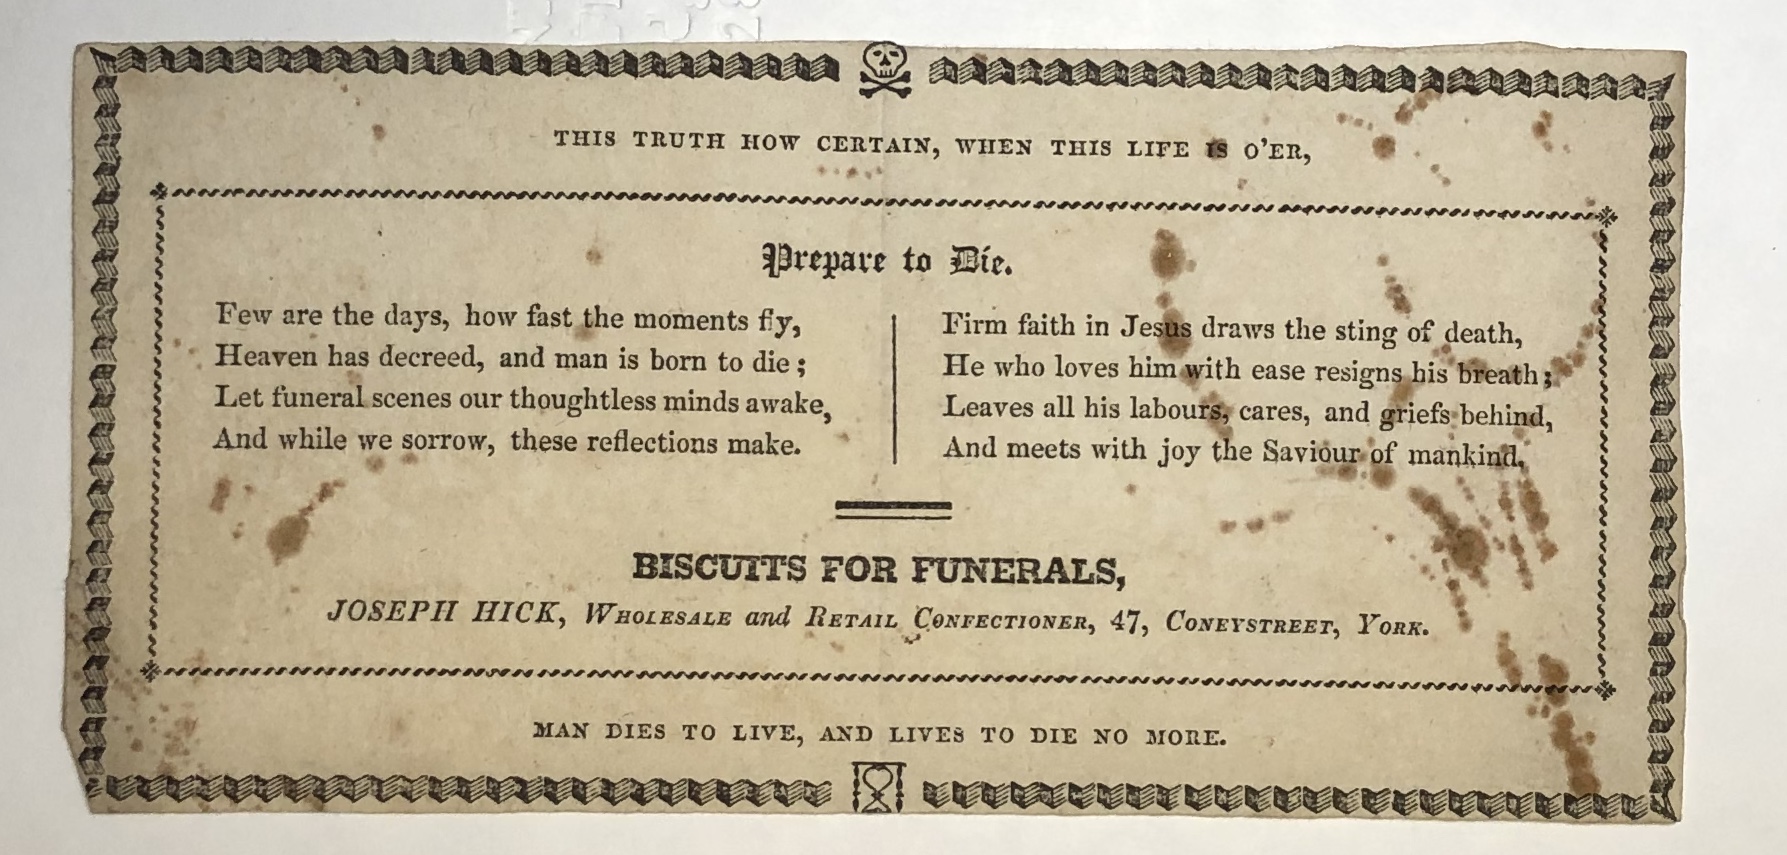 Advertisement for funeral buscuits with decorative elements and a short poem.